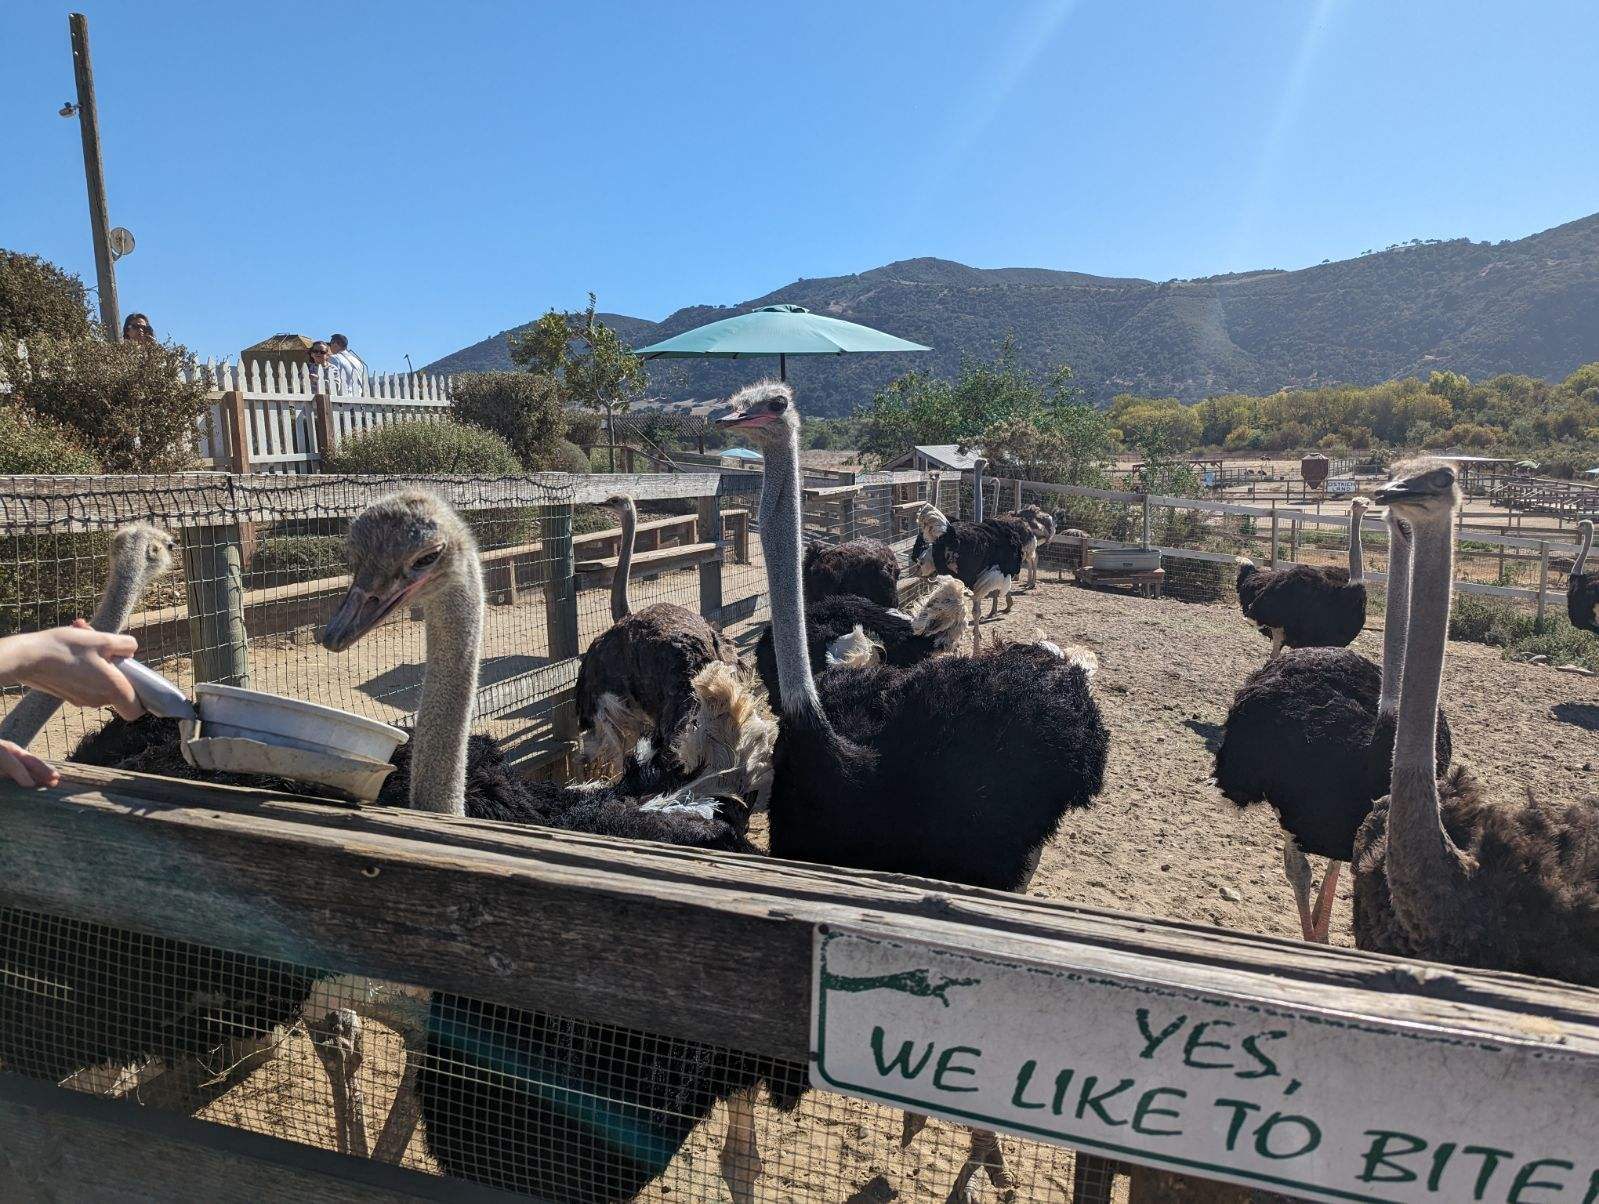 "Yes, we like to bite," reads a sign at Ostrichland USA.